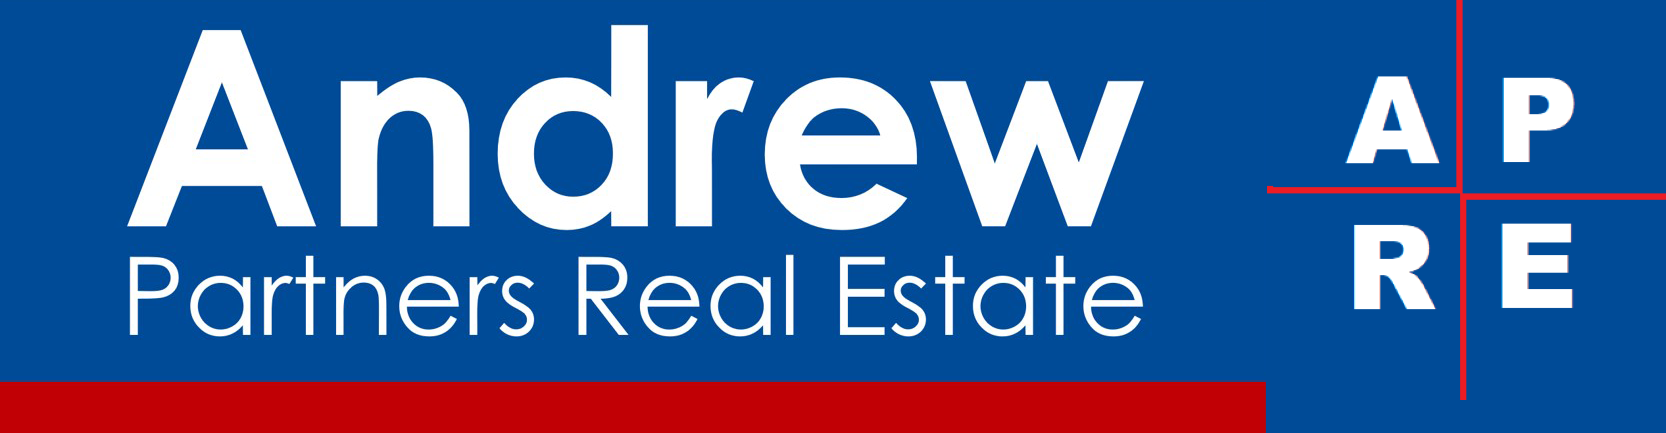 Real Estate Agency Andrew Partners Real Estate - FAIRFIELD